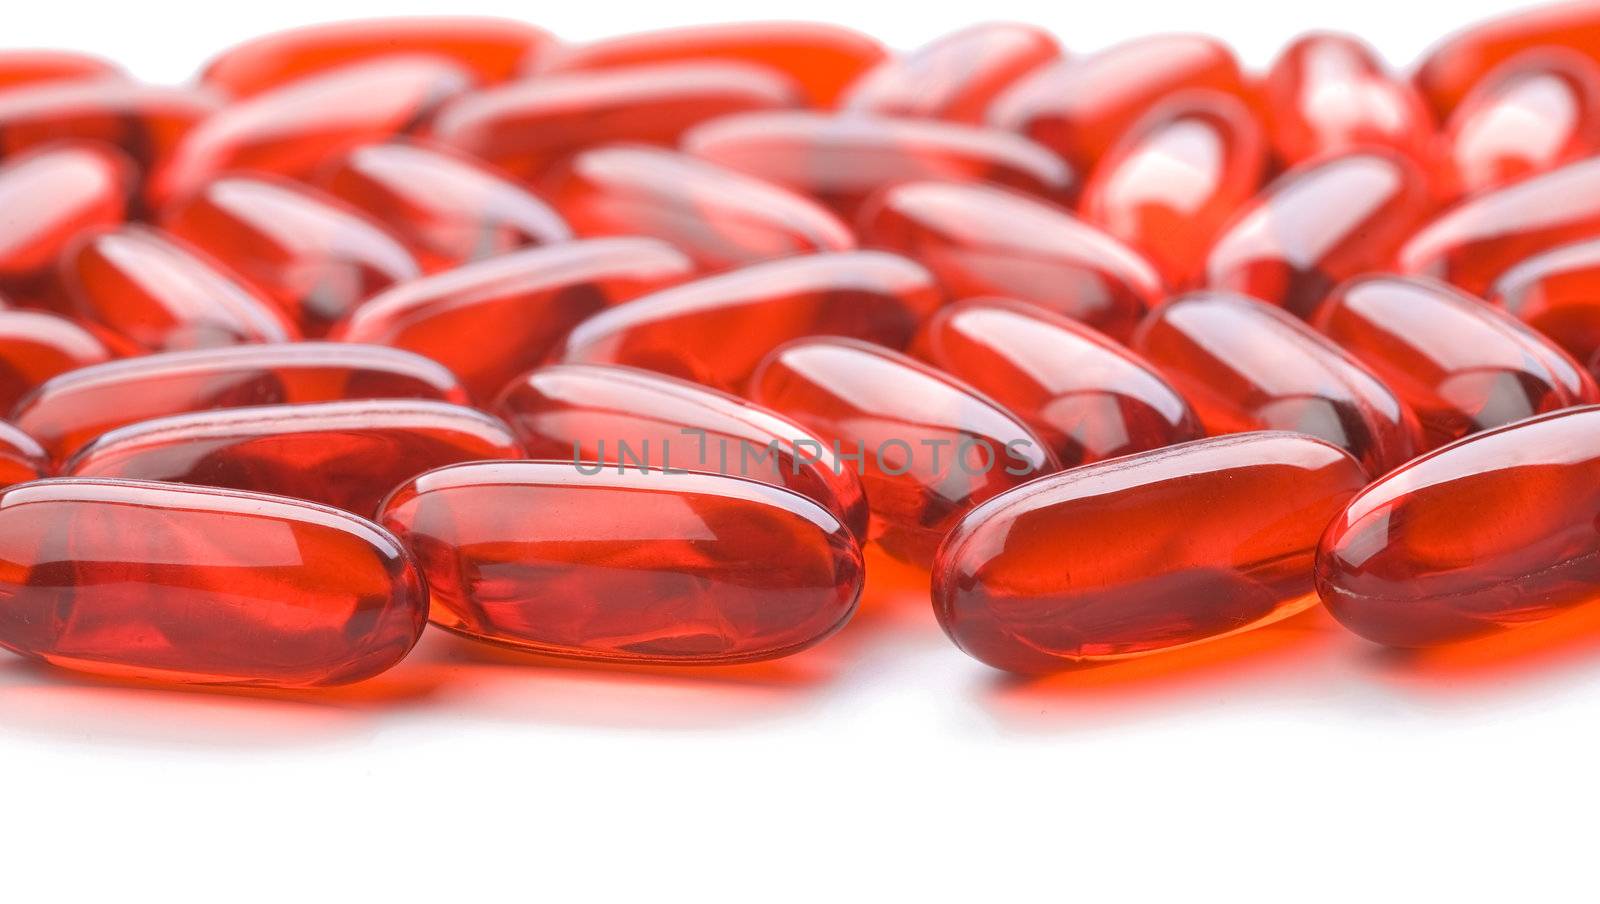 red tablets isolated on white background